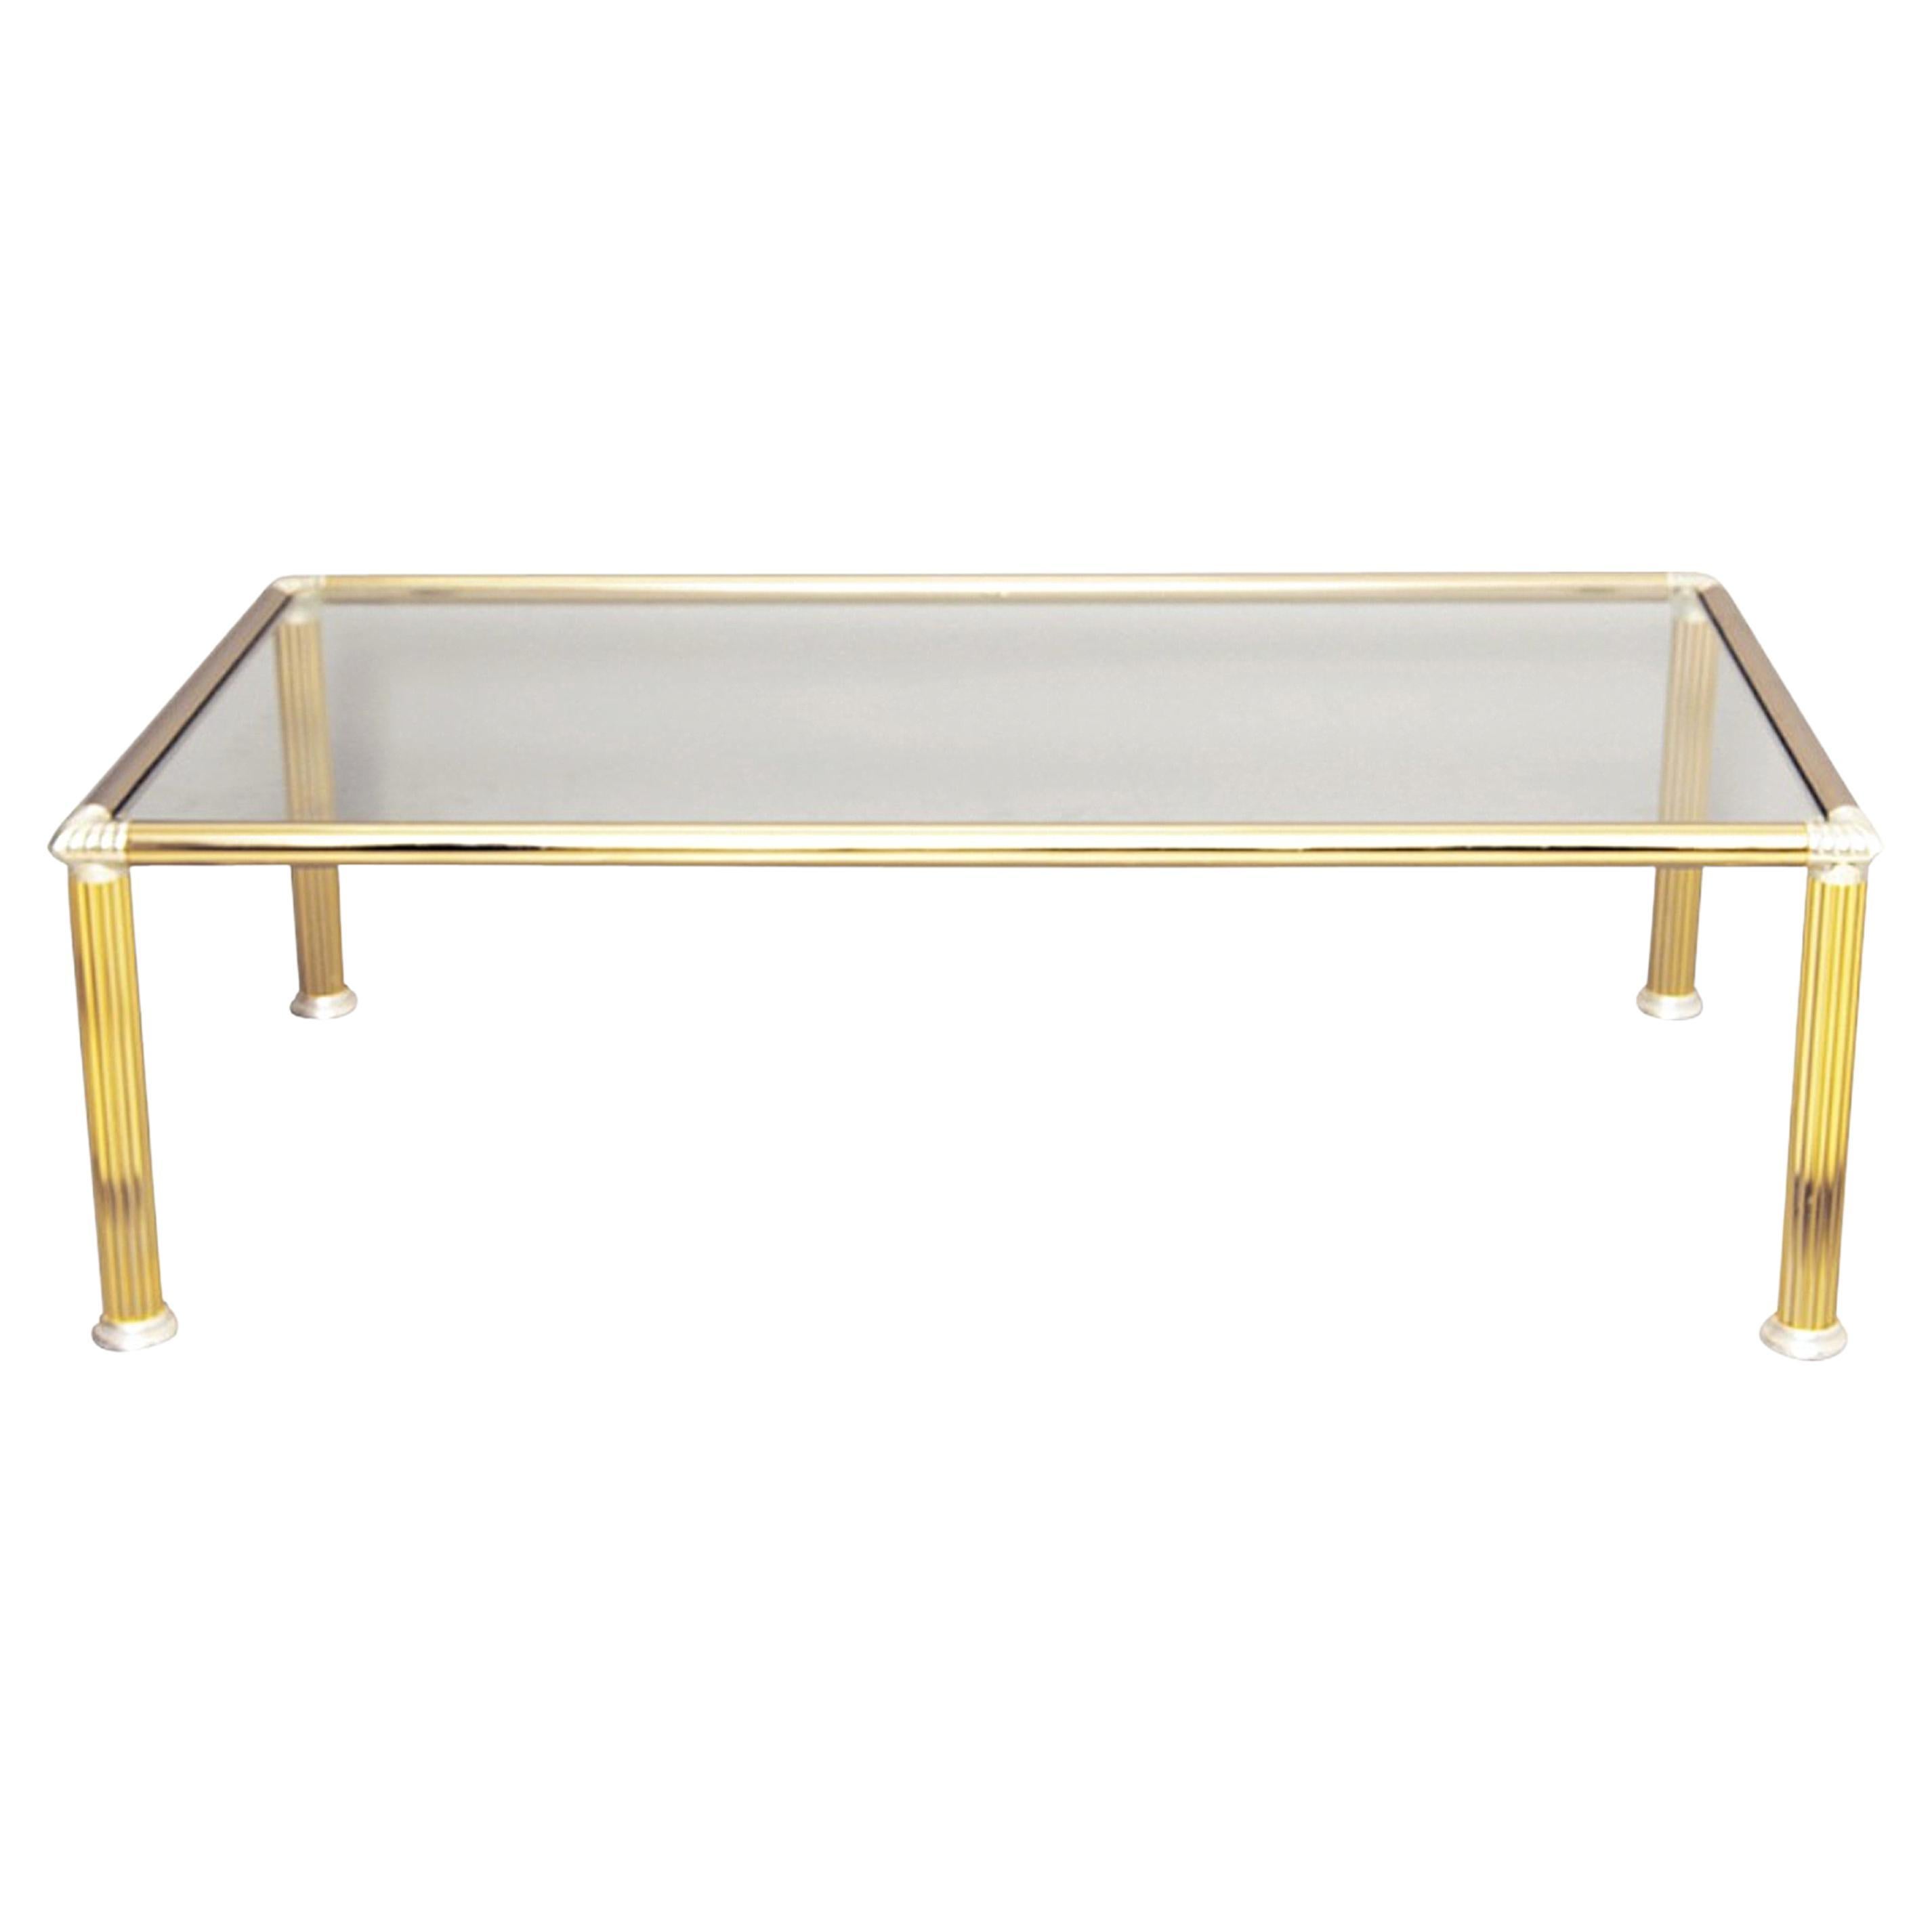 Chrome Brass Glass Coffee Table Hollywood Regency Midcentury Vintage 1970s For Sale